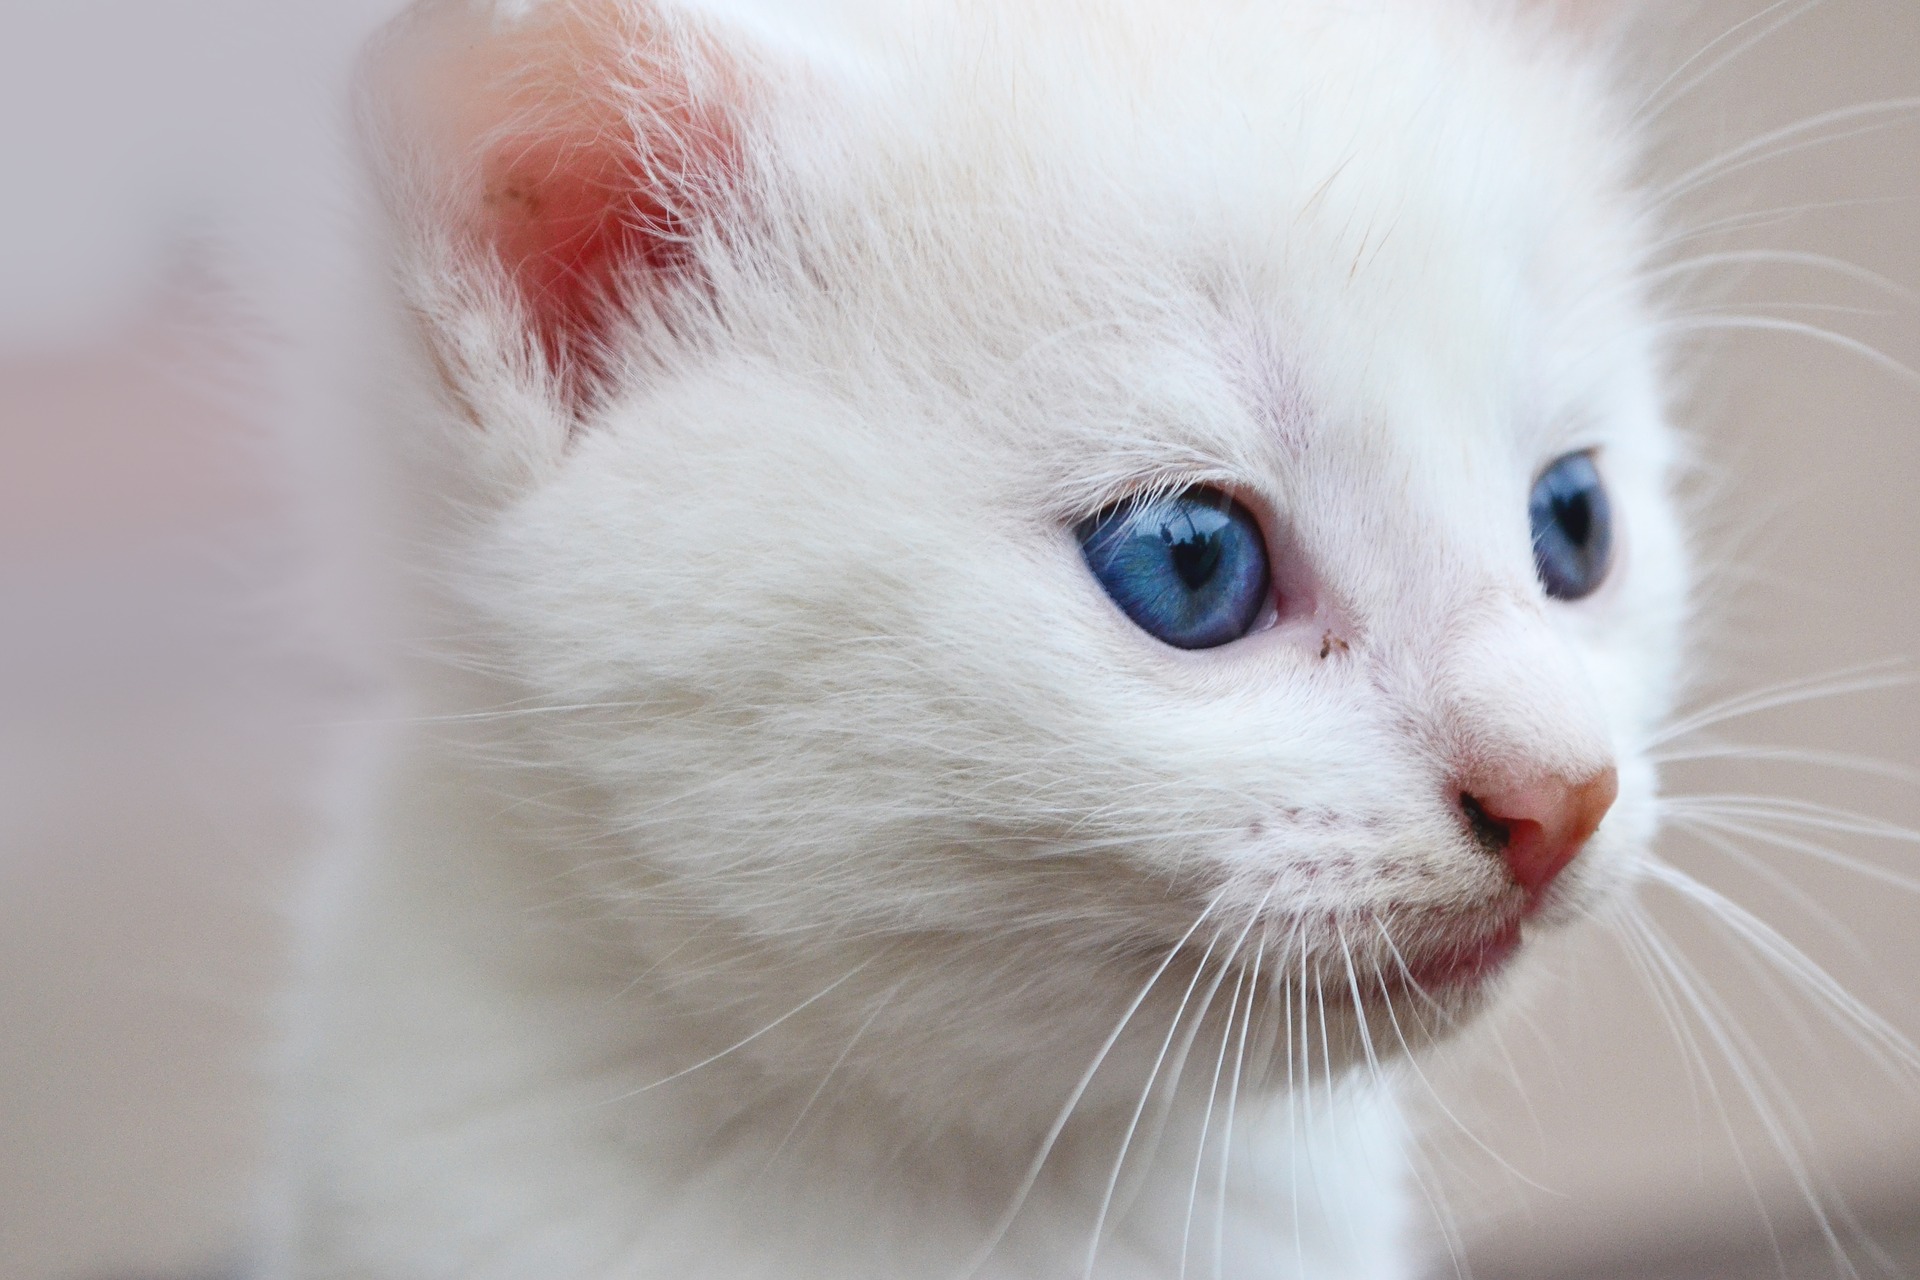 Cute White Baby Kitten Hd Wallpapers 1920x1280p - Cute White Cat With Blue Eyes - HD Wallpaper 